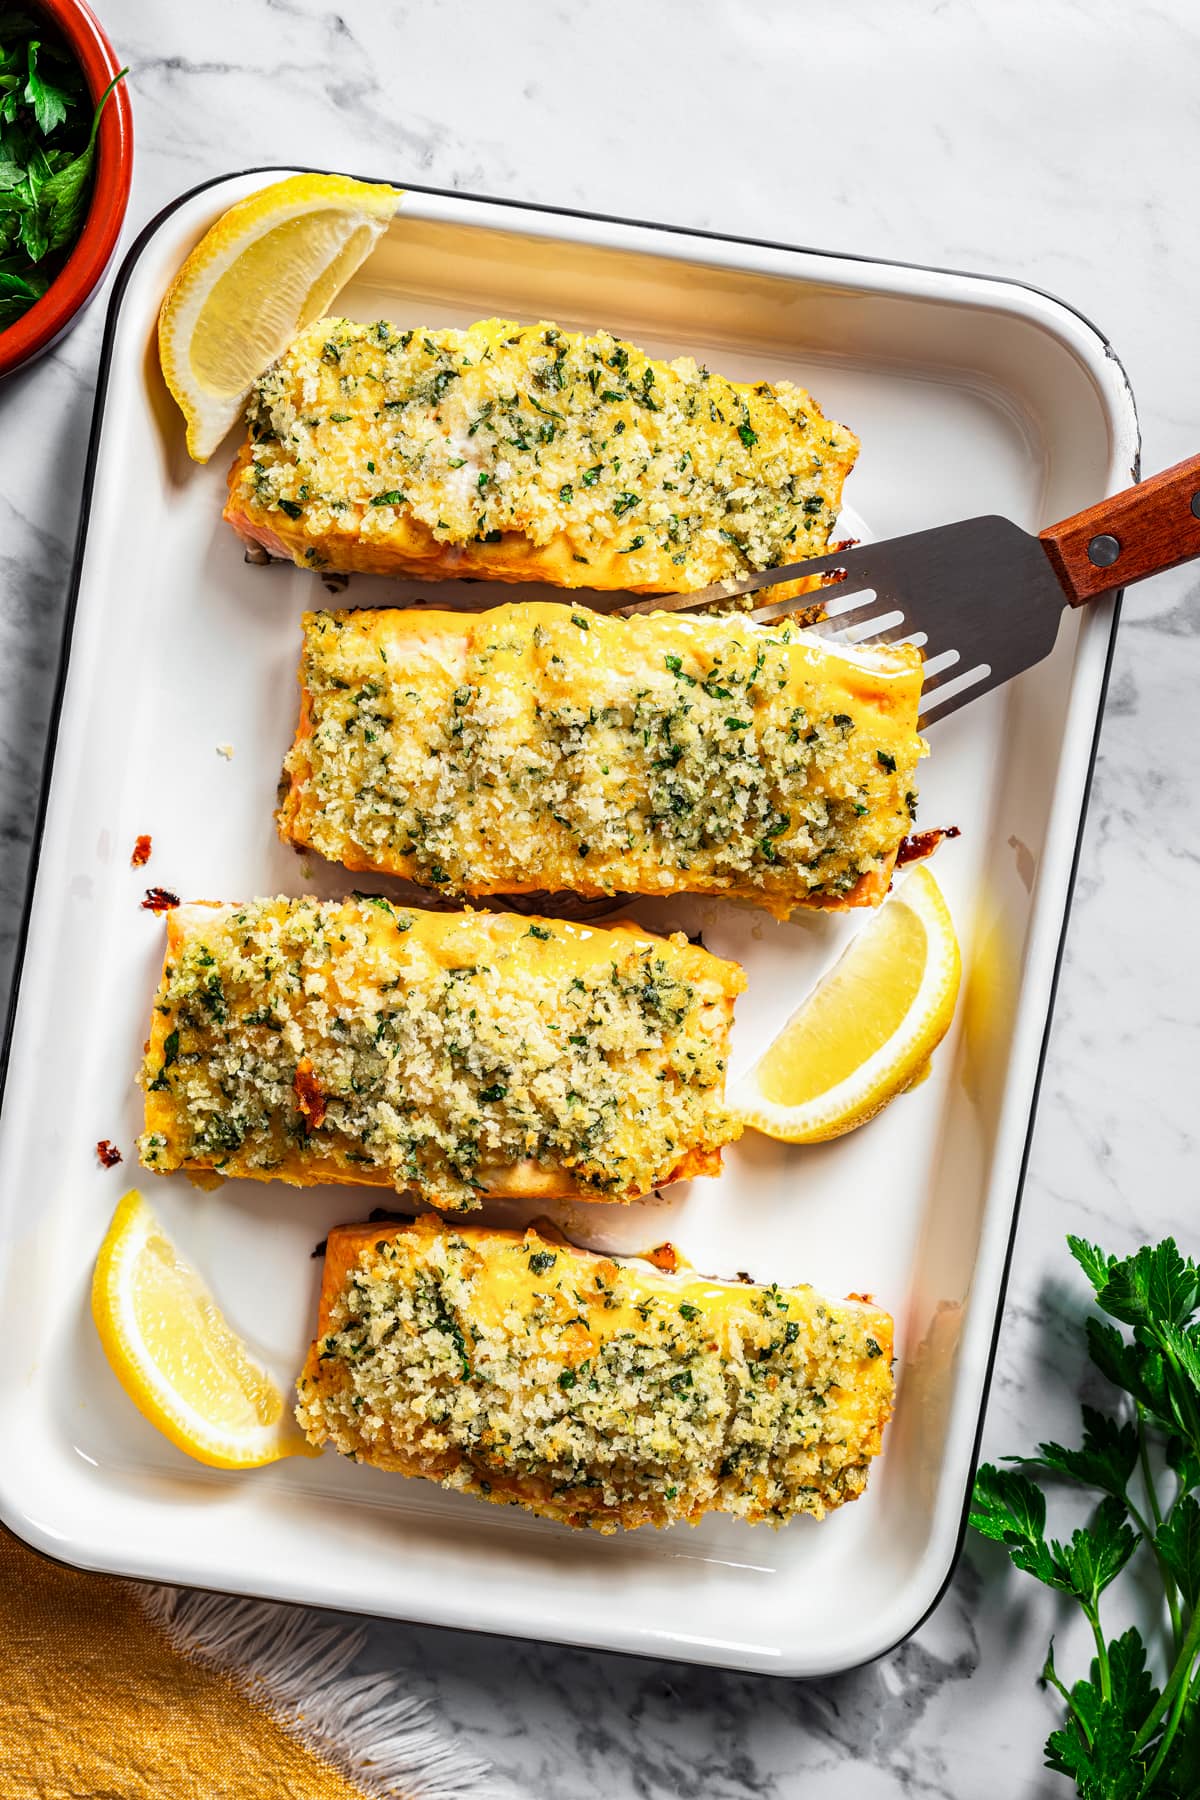 Baked honey mustard salmon fillets crusted with panko breadcrumbs on a baking sheet, with a spatula tucked under one fillet.